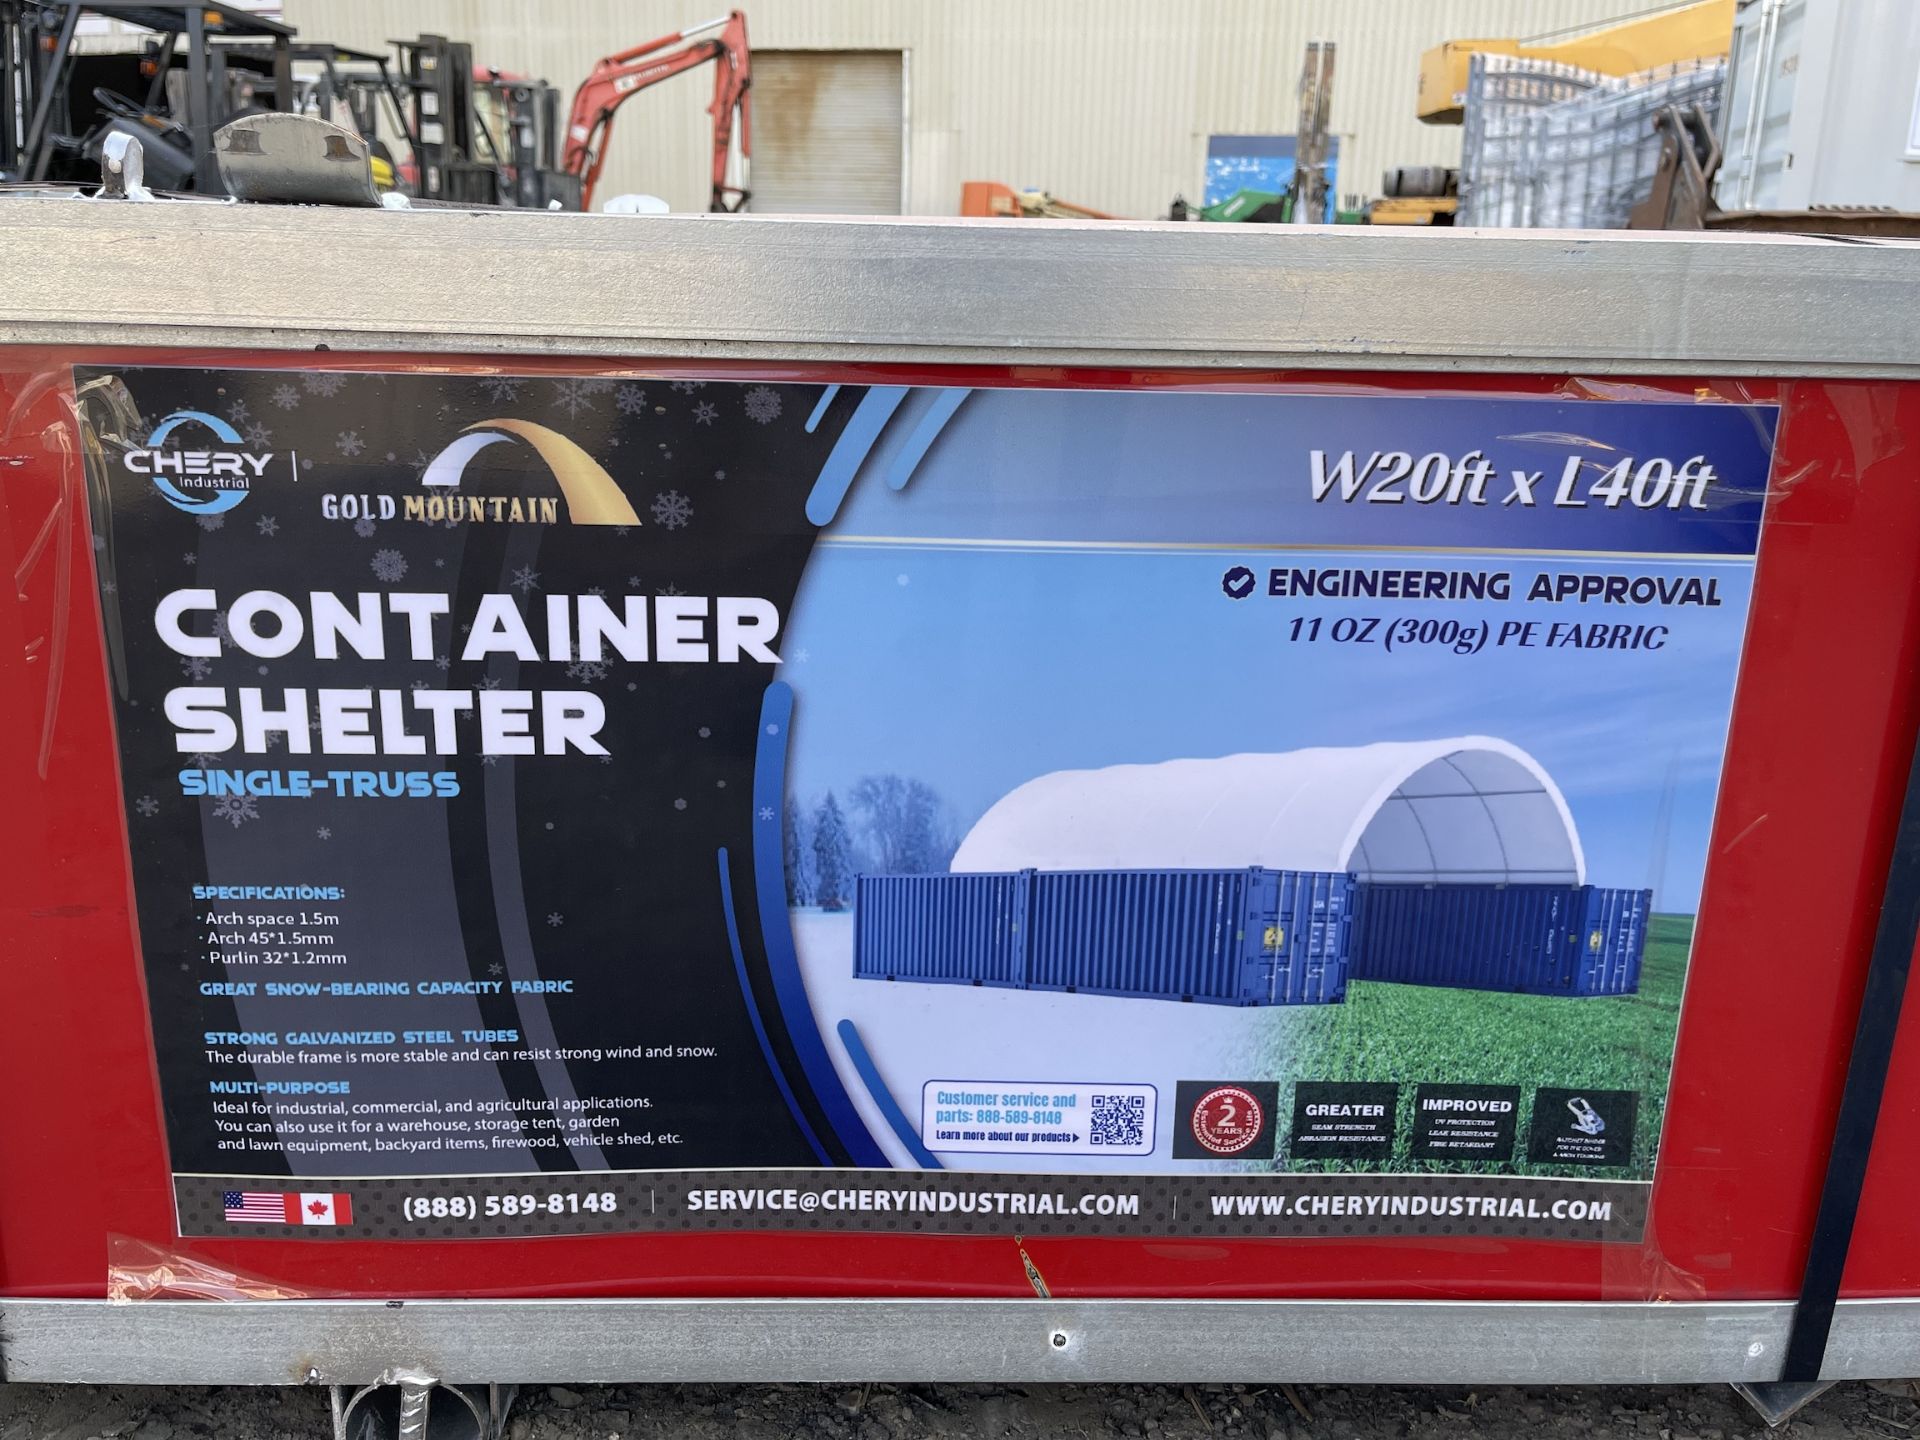 Brand New Gold Mountain 20ft X 40ft Container Shelter (NY160) - Image 2 of 4